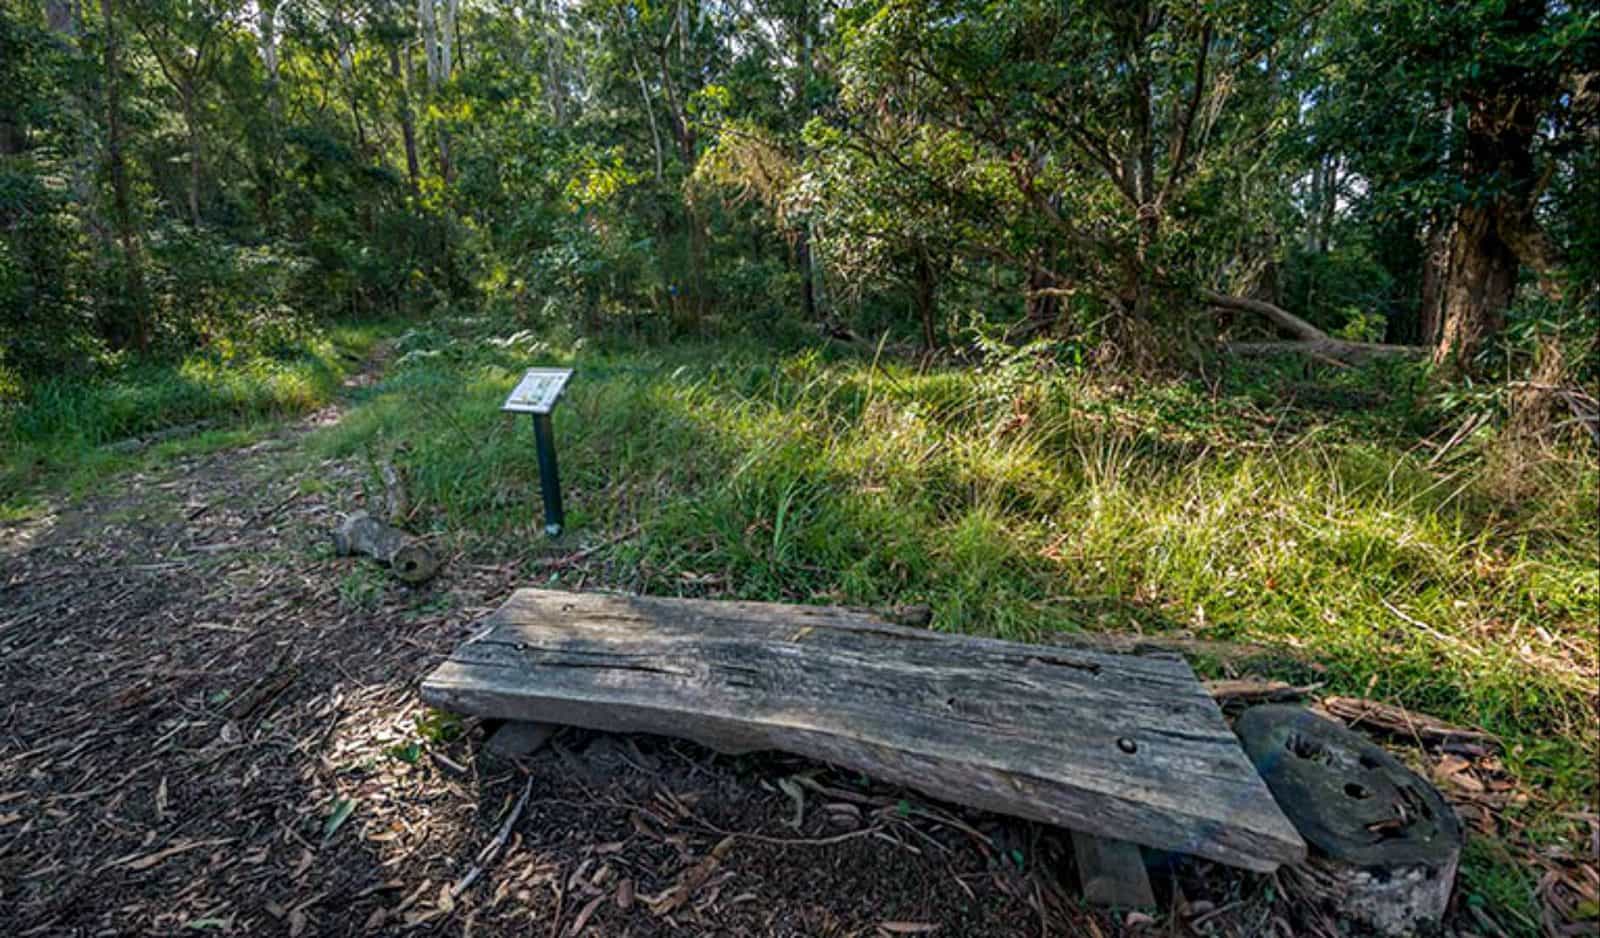 Browns Forest loop trail, Dalrymple-Hay Nature Reserve. Photo: John Spencer